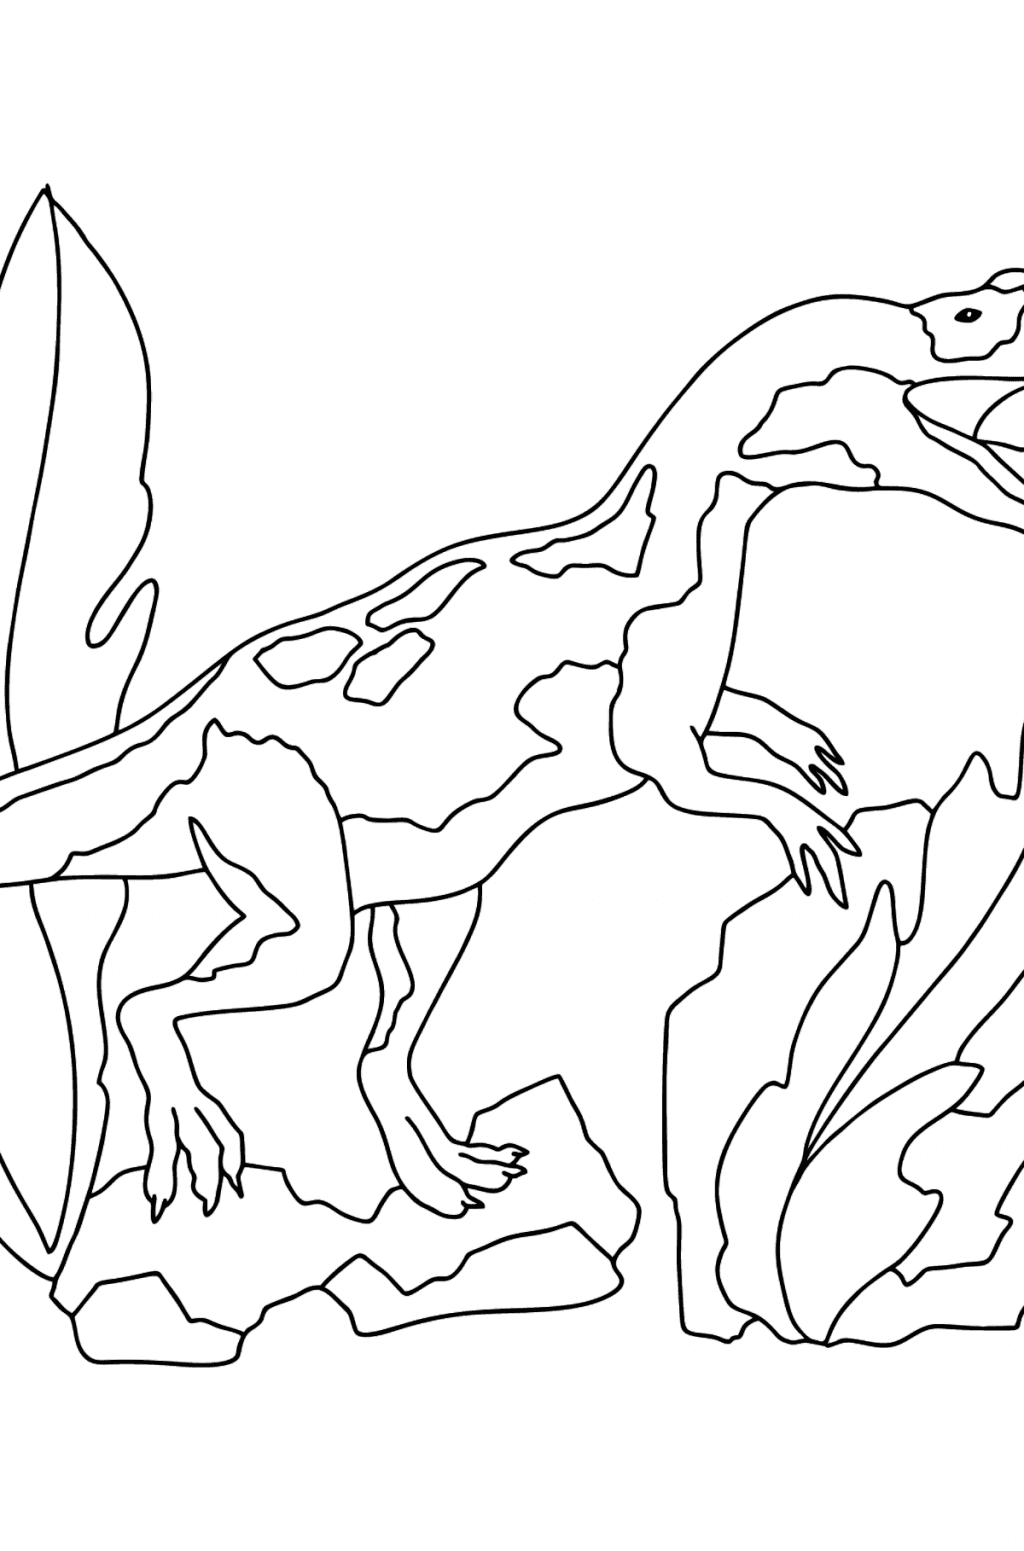 Dinosaurs Coloring Pages - Print, and Color Online!